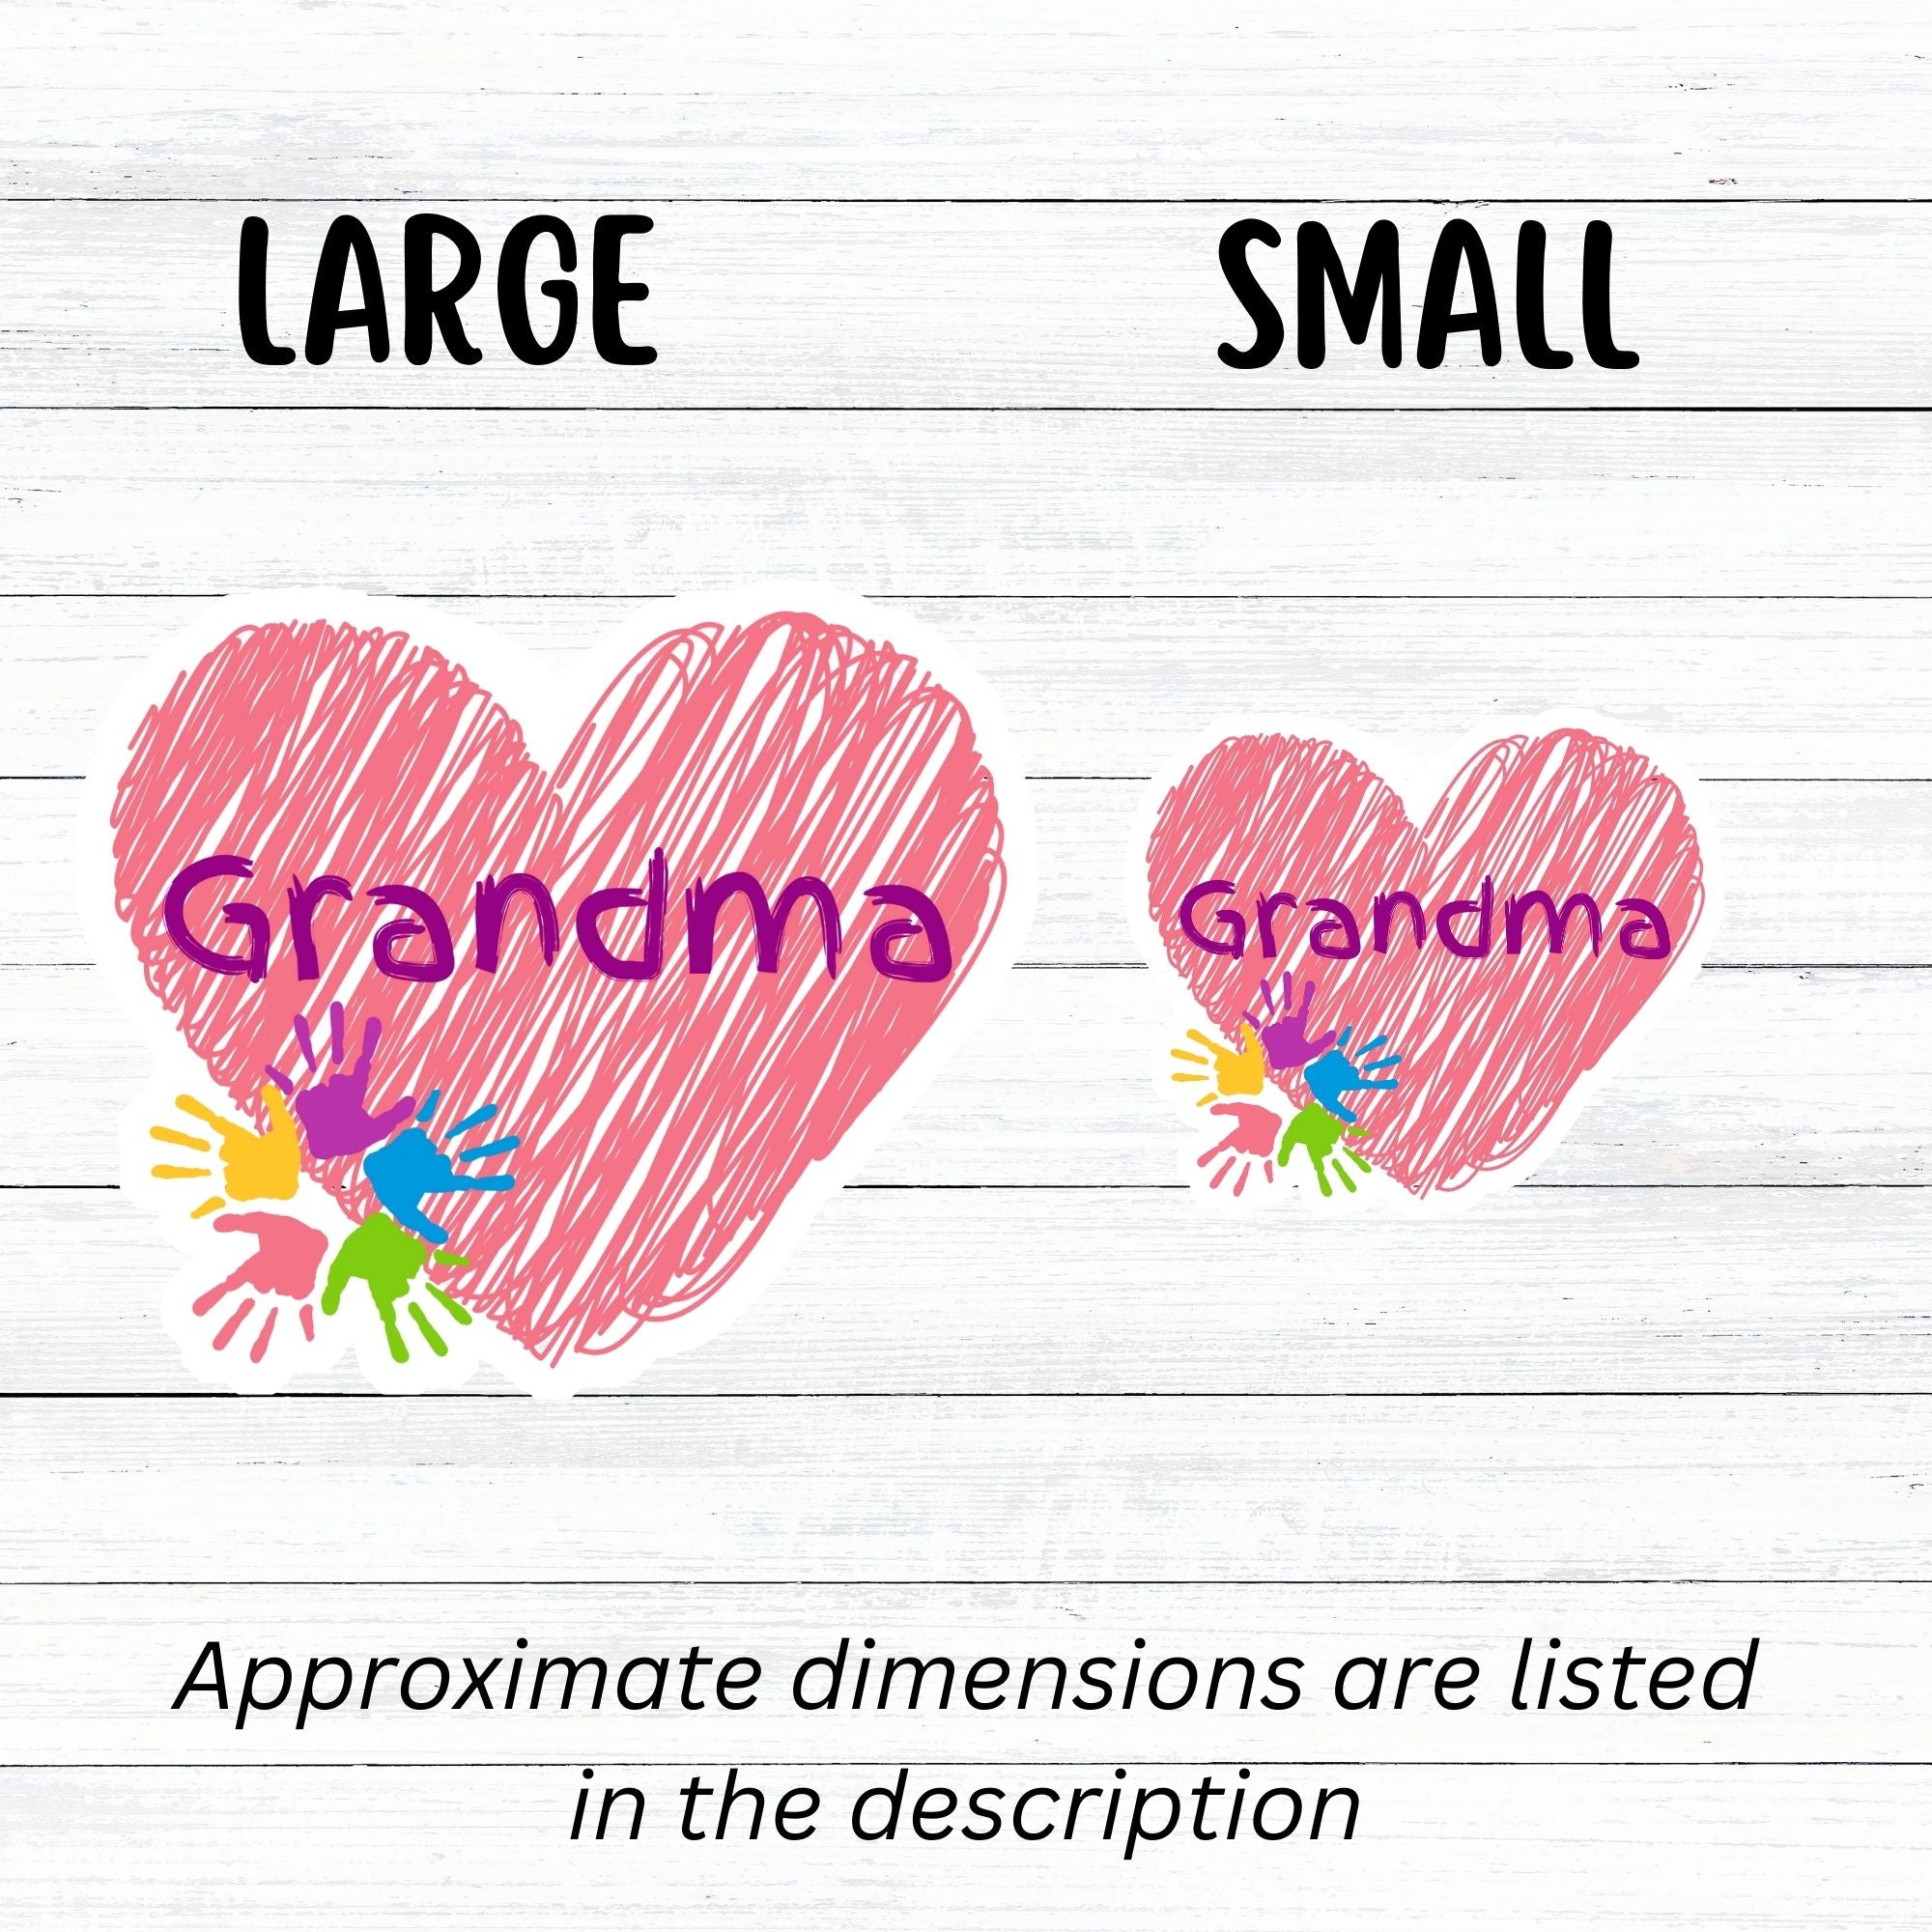 Show how much you love grandma with this individual die-cut sticker. This makes a great gift for grandma, or for all grandma's to proudly show they are a grandmother! This sticker features a red scribbled heart with Grandma written across the middle and 5 small paint hands on the lower left side. This image shows large and small Grandma die-cut stickers next to each other.